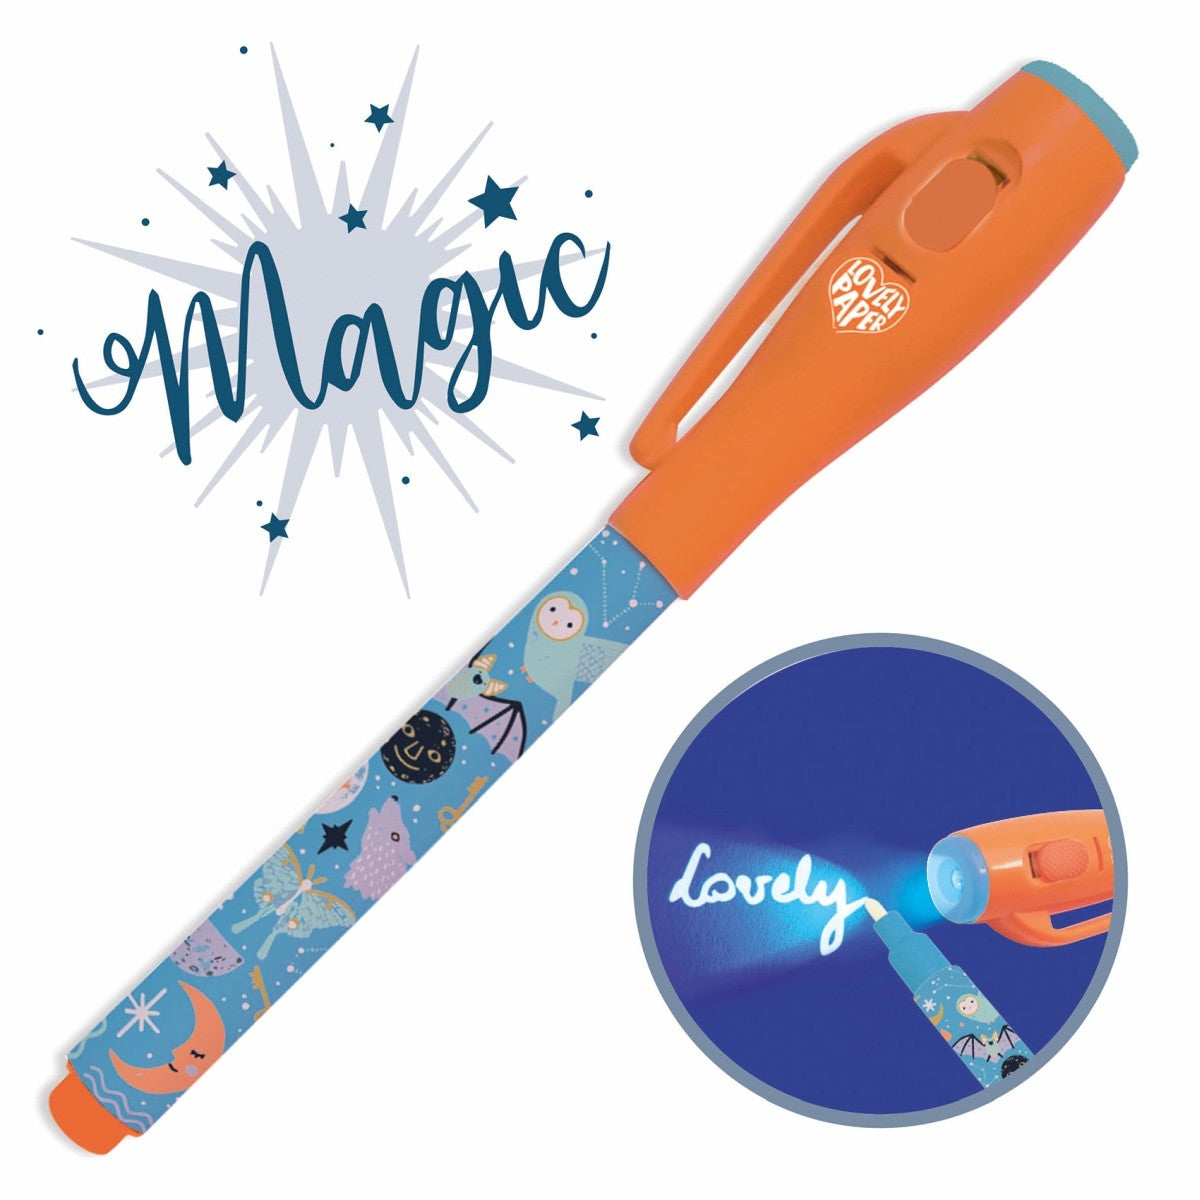 Magic Pen (Available in 2 styles)